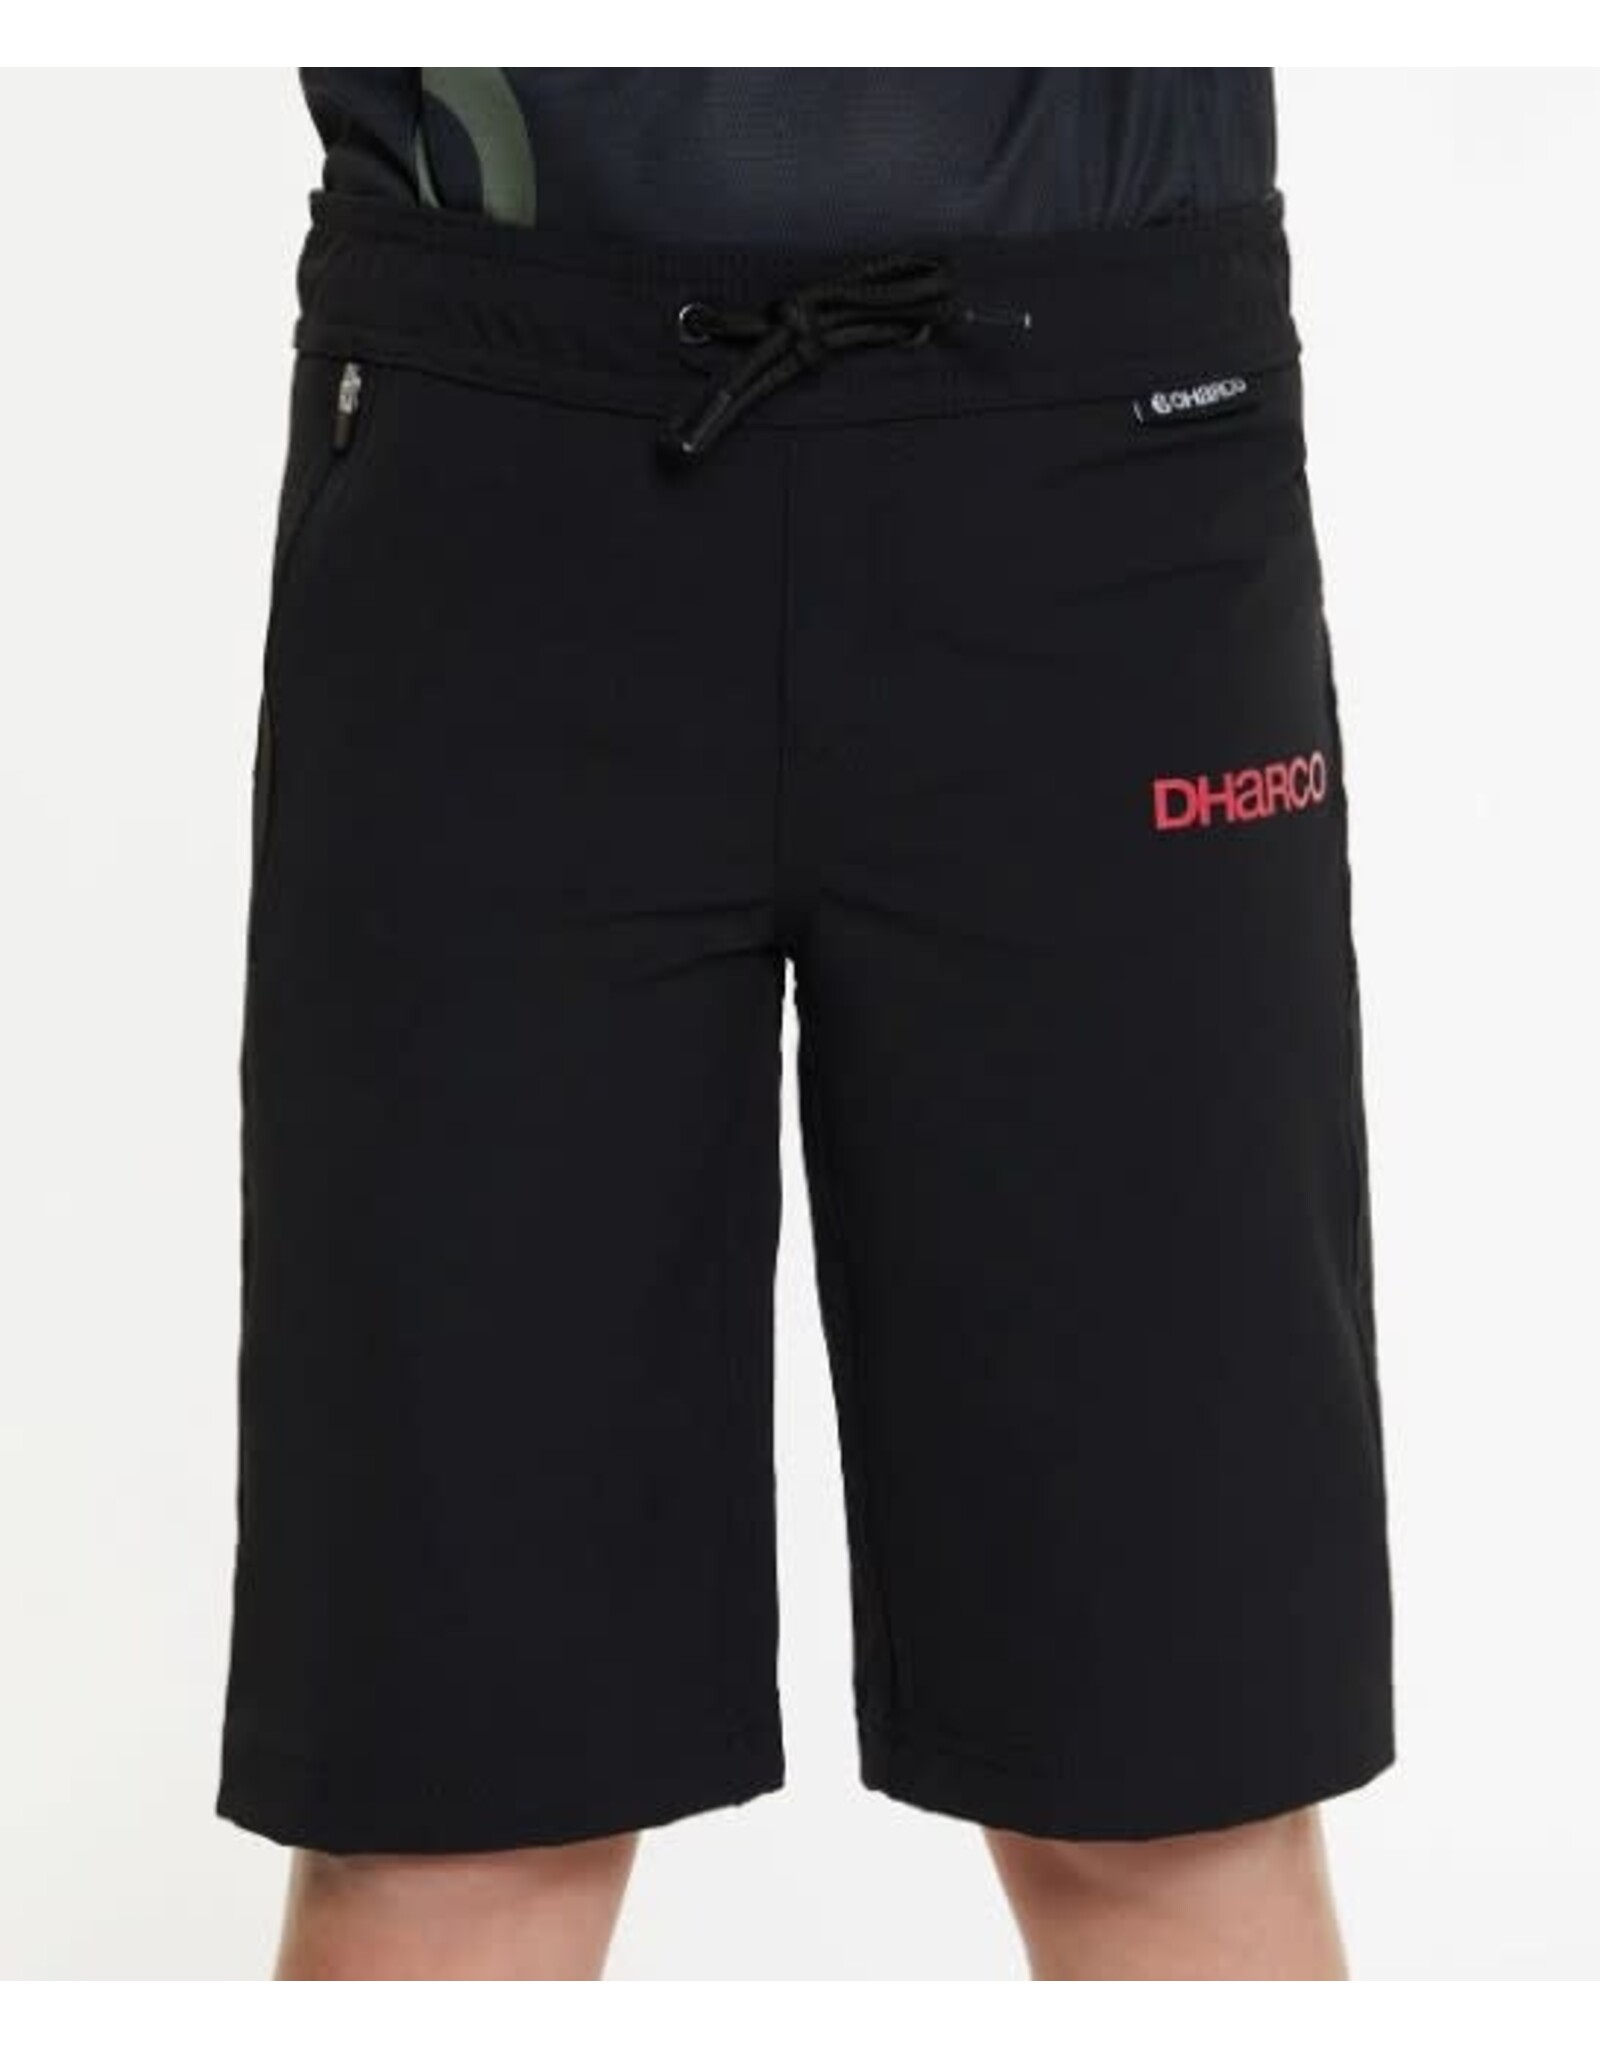 Dharco Short DHarco Gravity youth